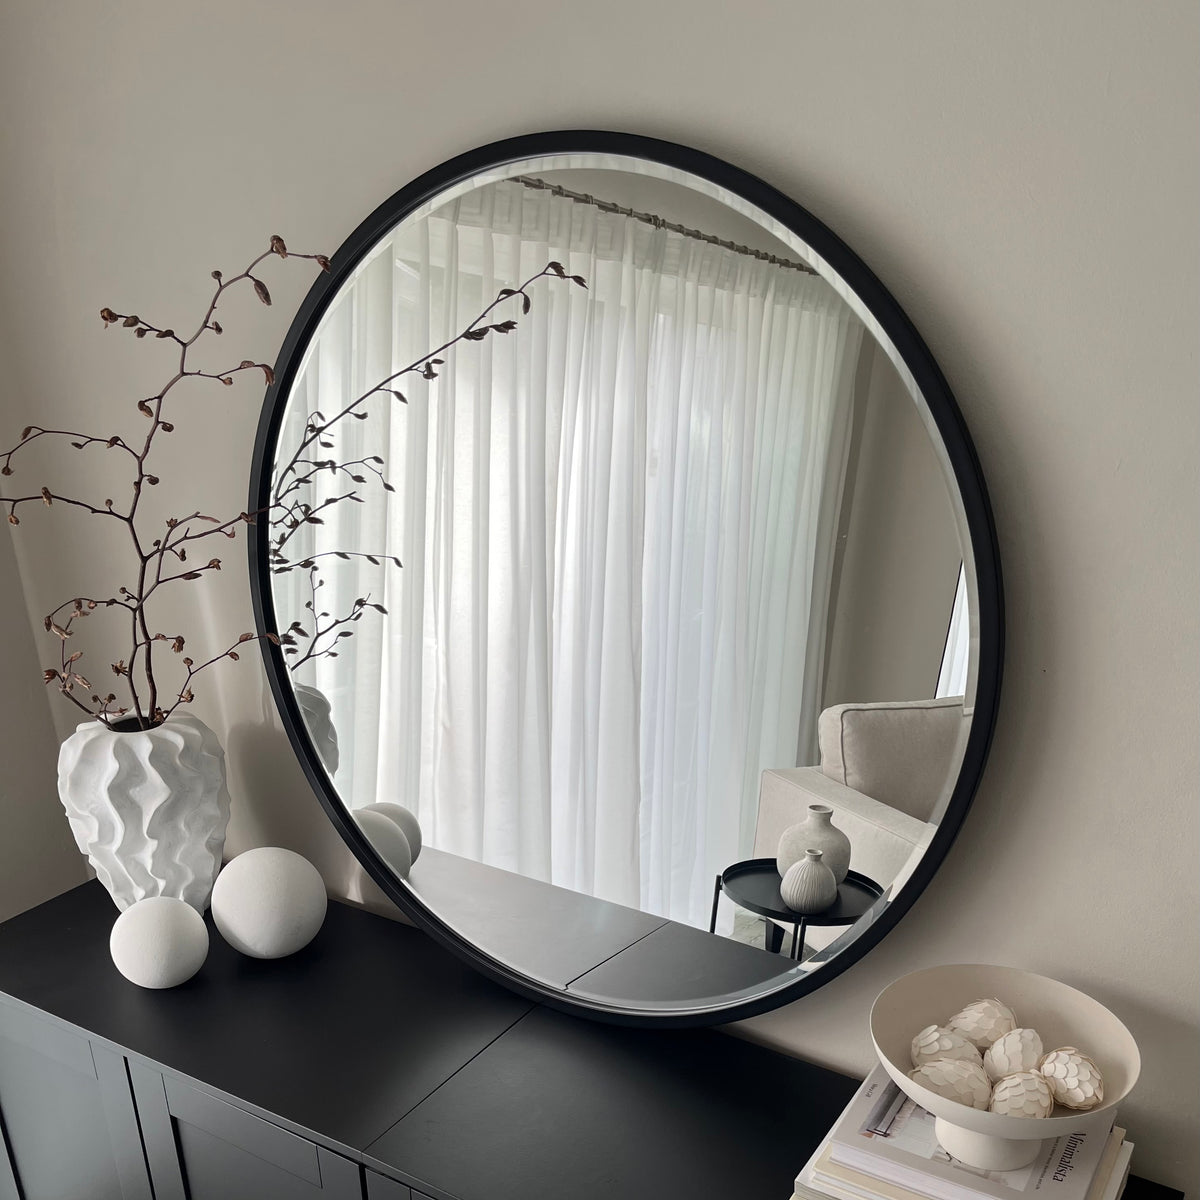 Black Metal Modern Round Wall Mirror leaning against wall